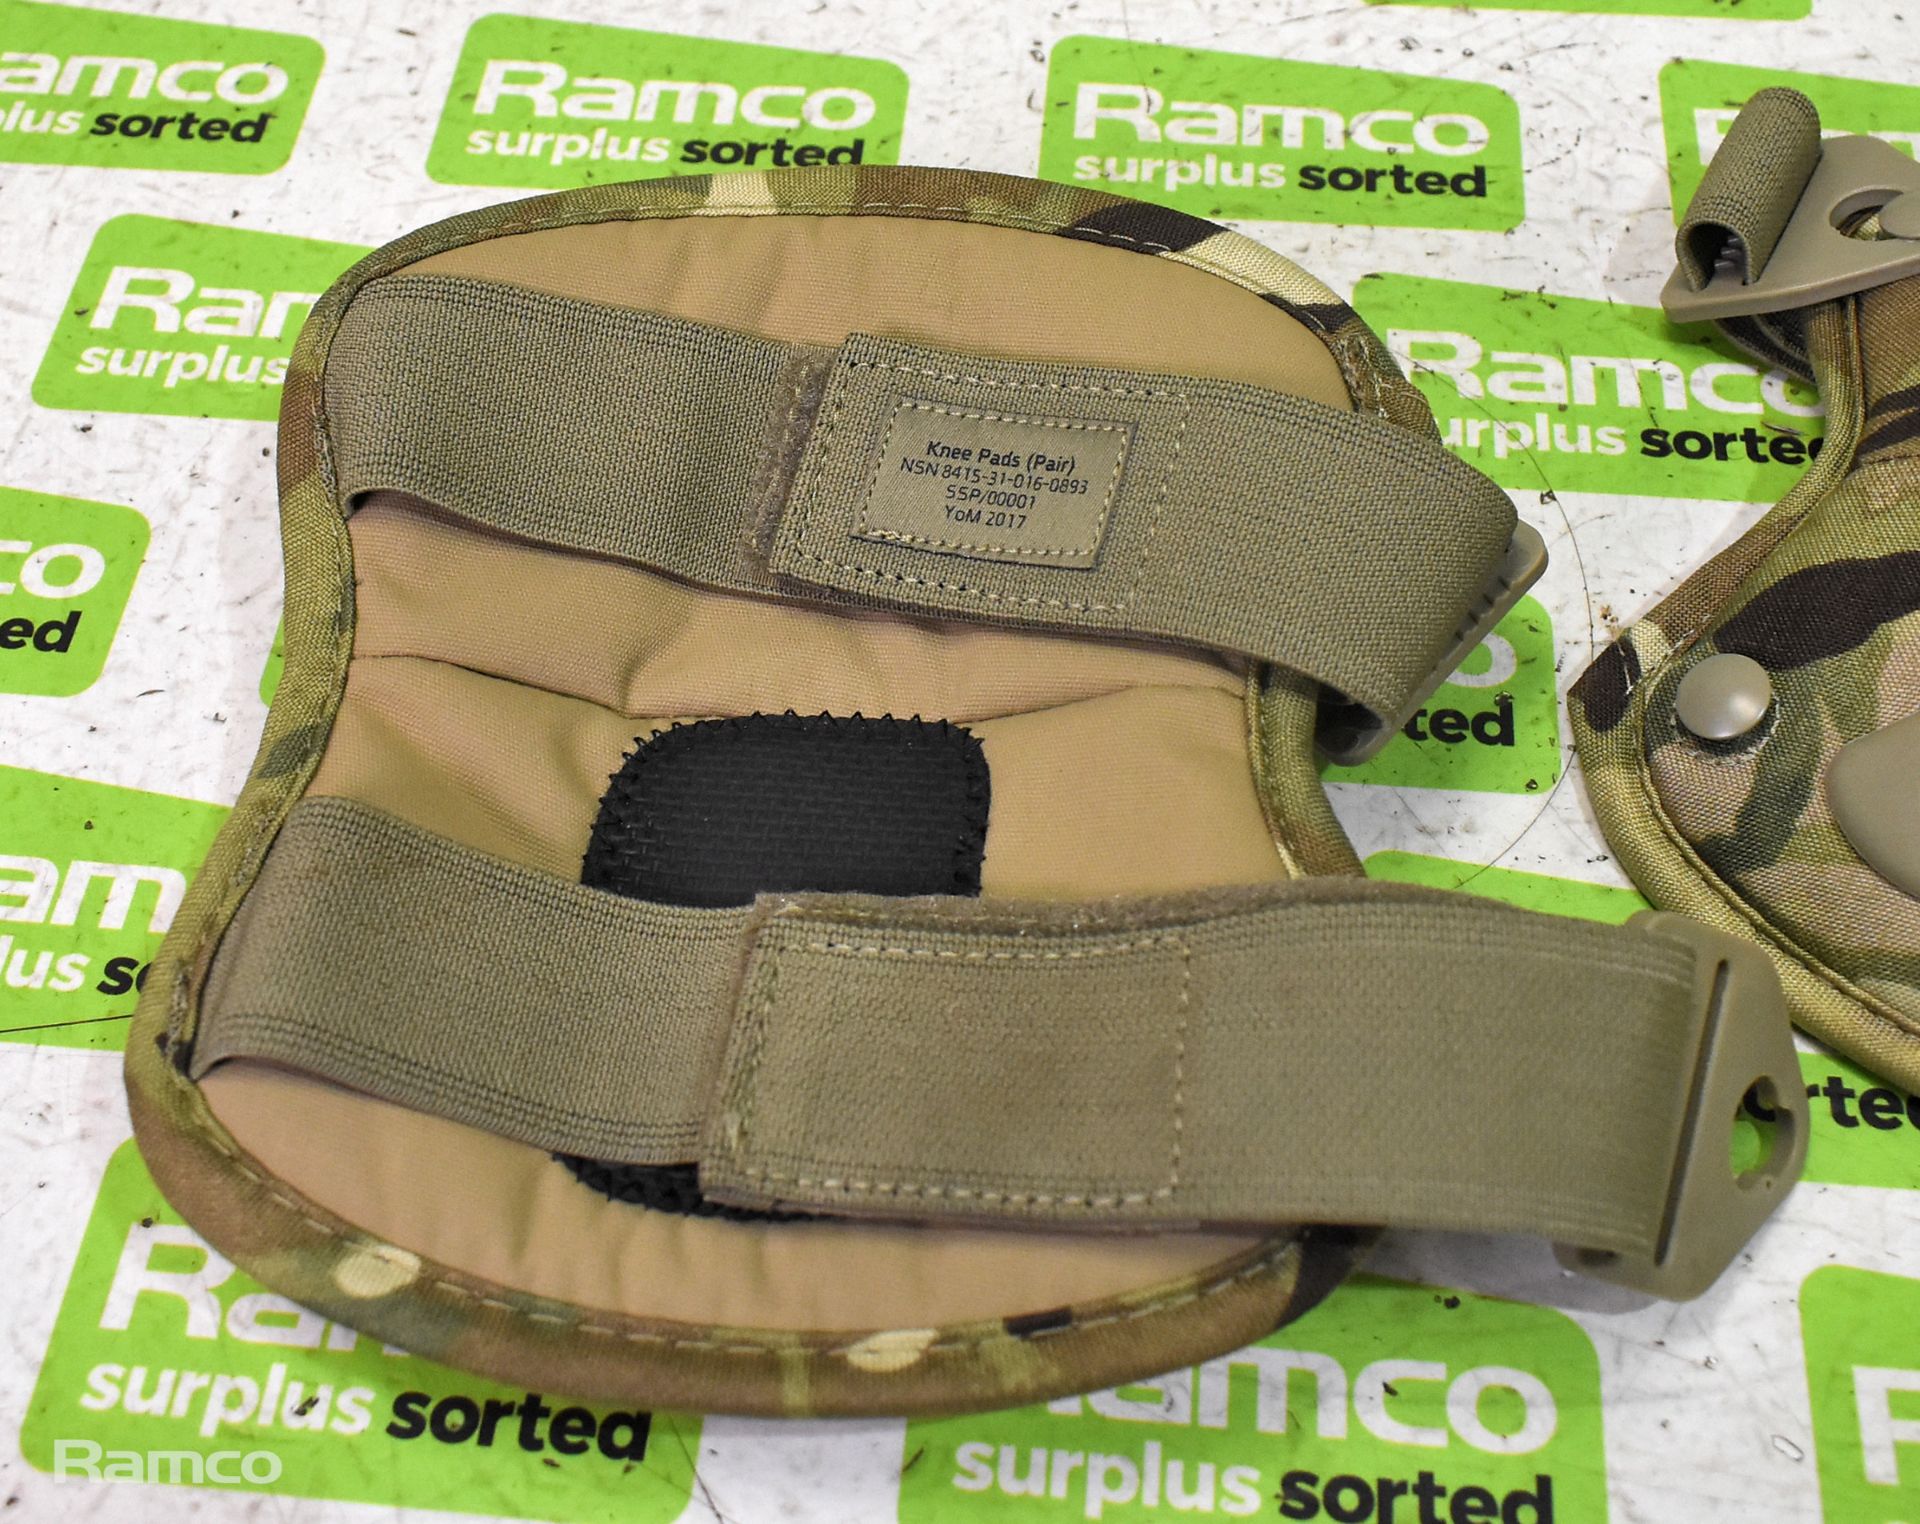 16x British Army MTP knee pads - mixed grades - Image 2 of 6